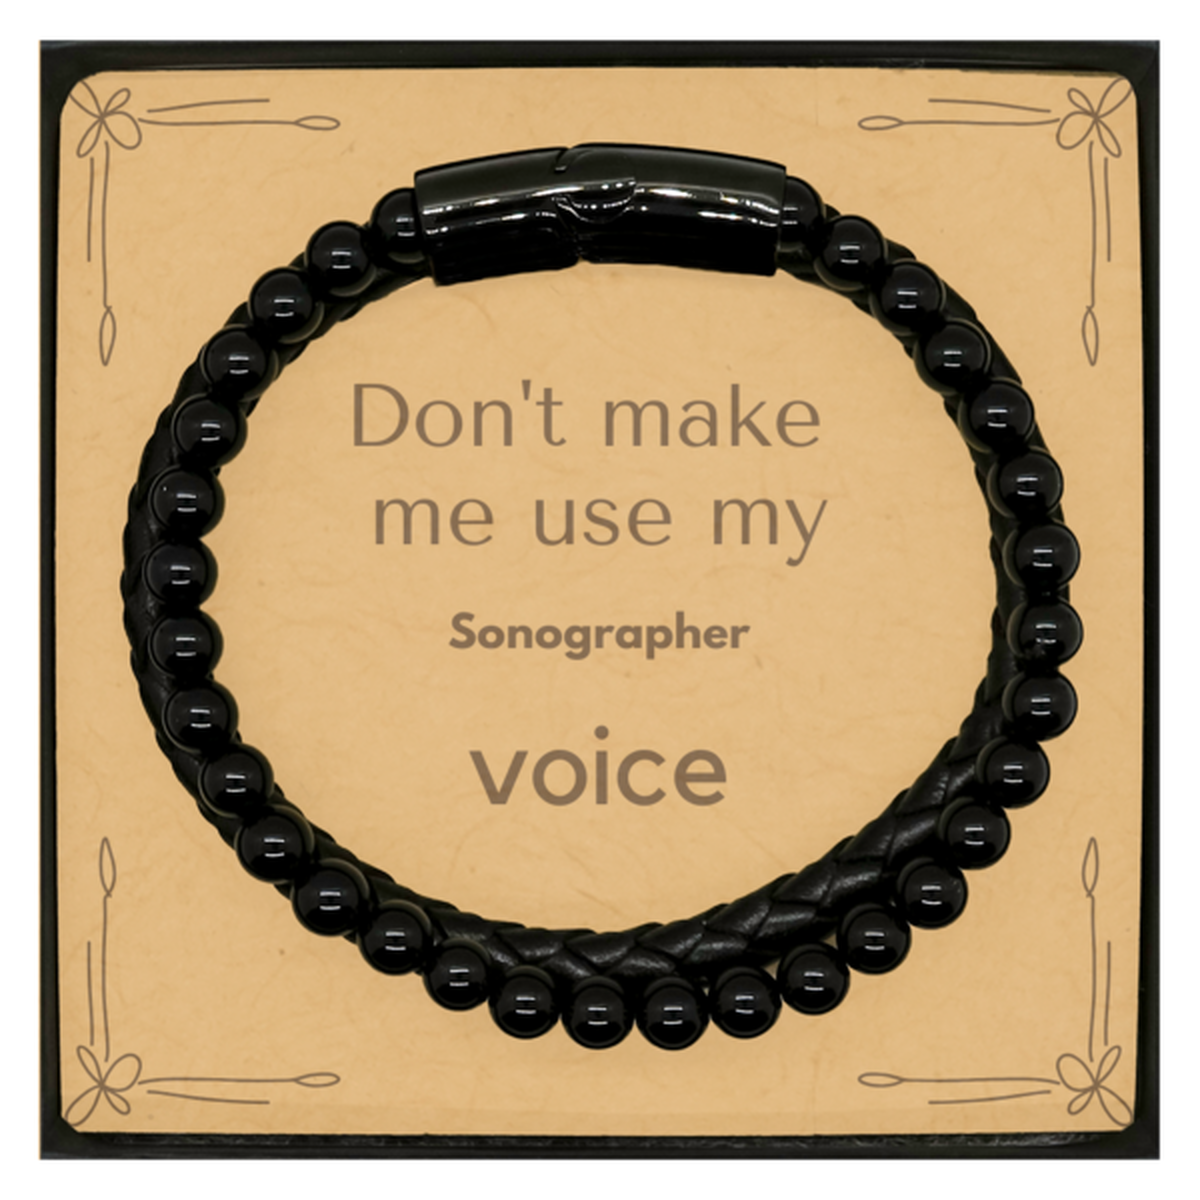 Don't make me use my Sonographer voice, Sarcasm Sonographer Card Gifts, Christmas Sonographer Stone Leather Bracelets Birthday Unique Gifts For Sonographer Coworkers, Men, Women, Colleague, Friends